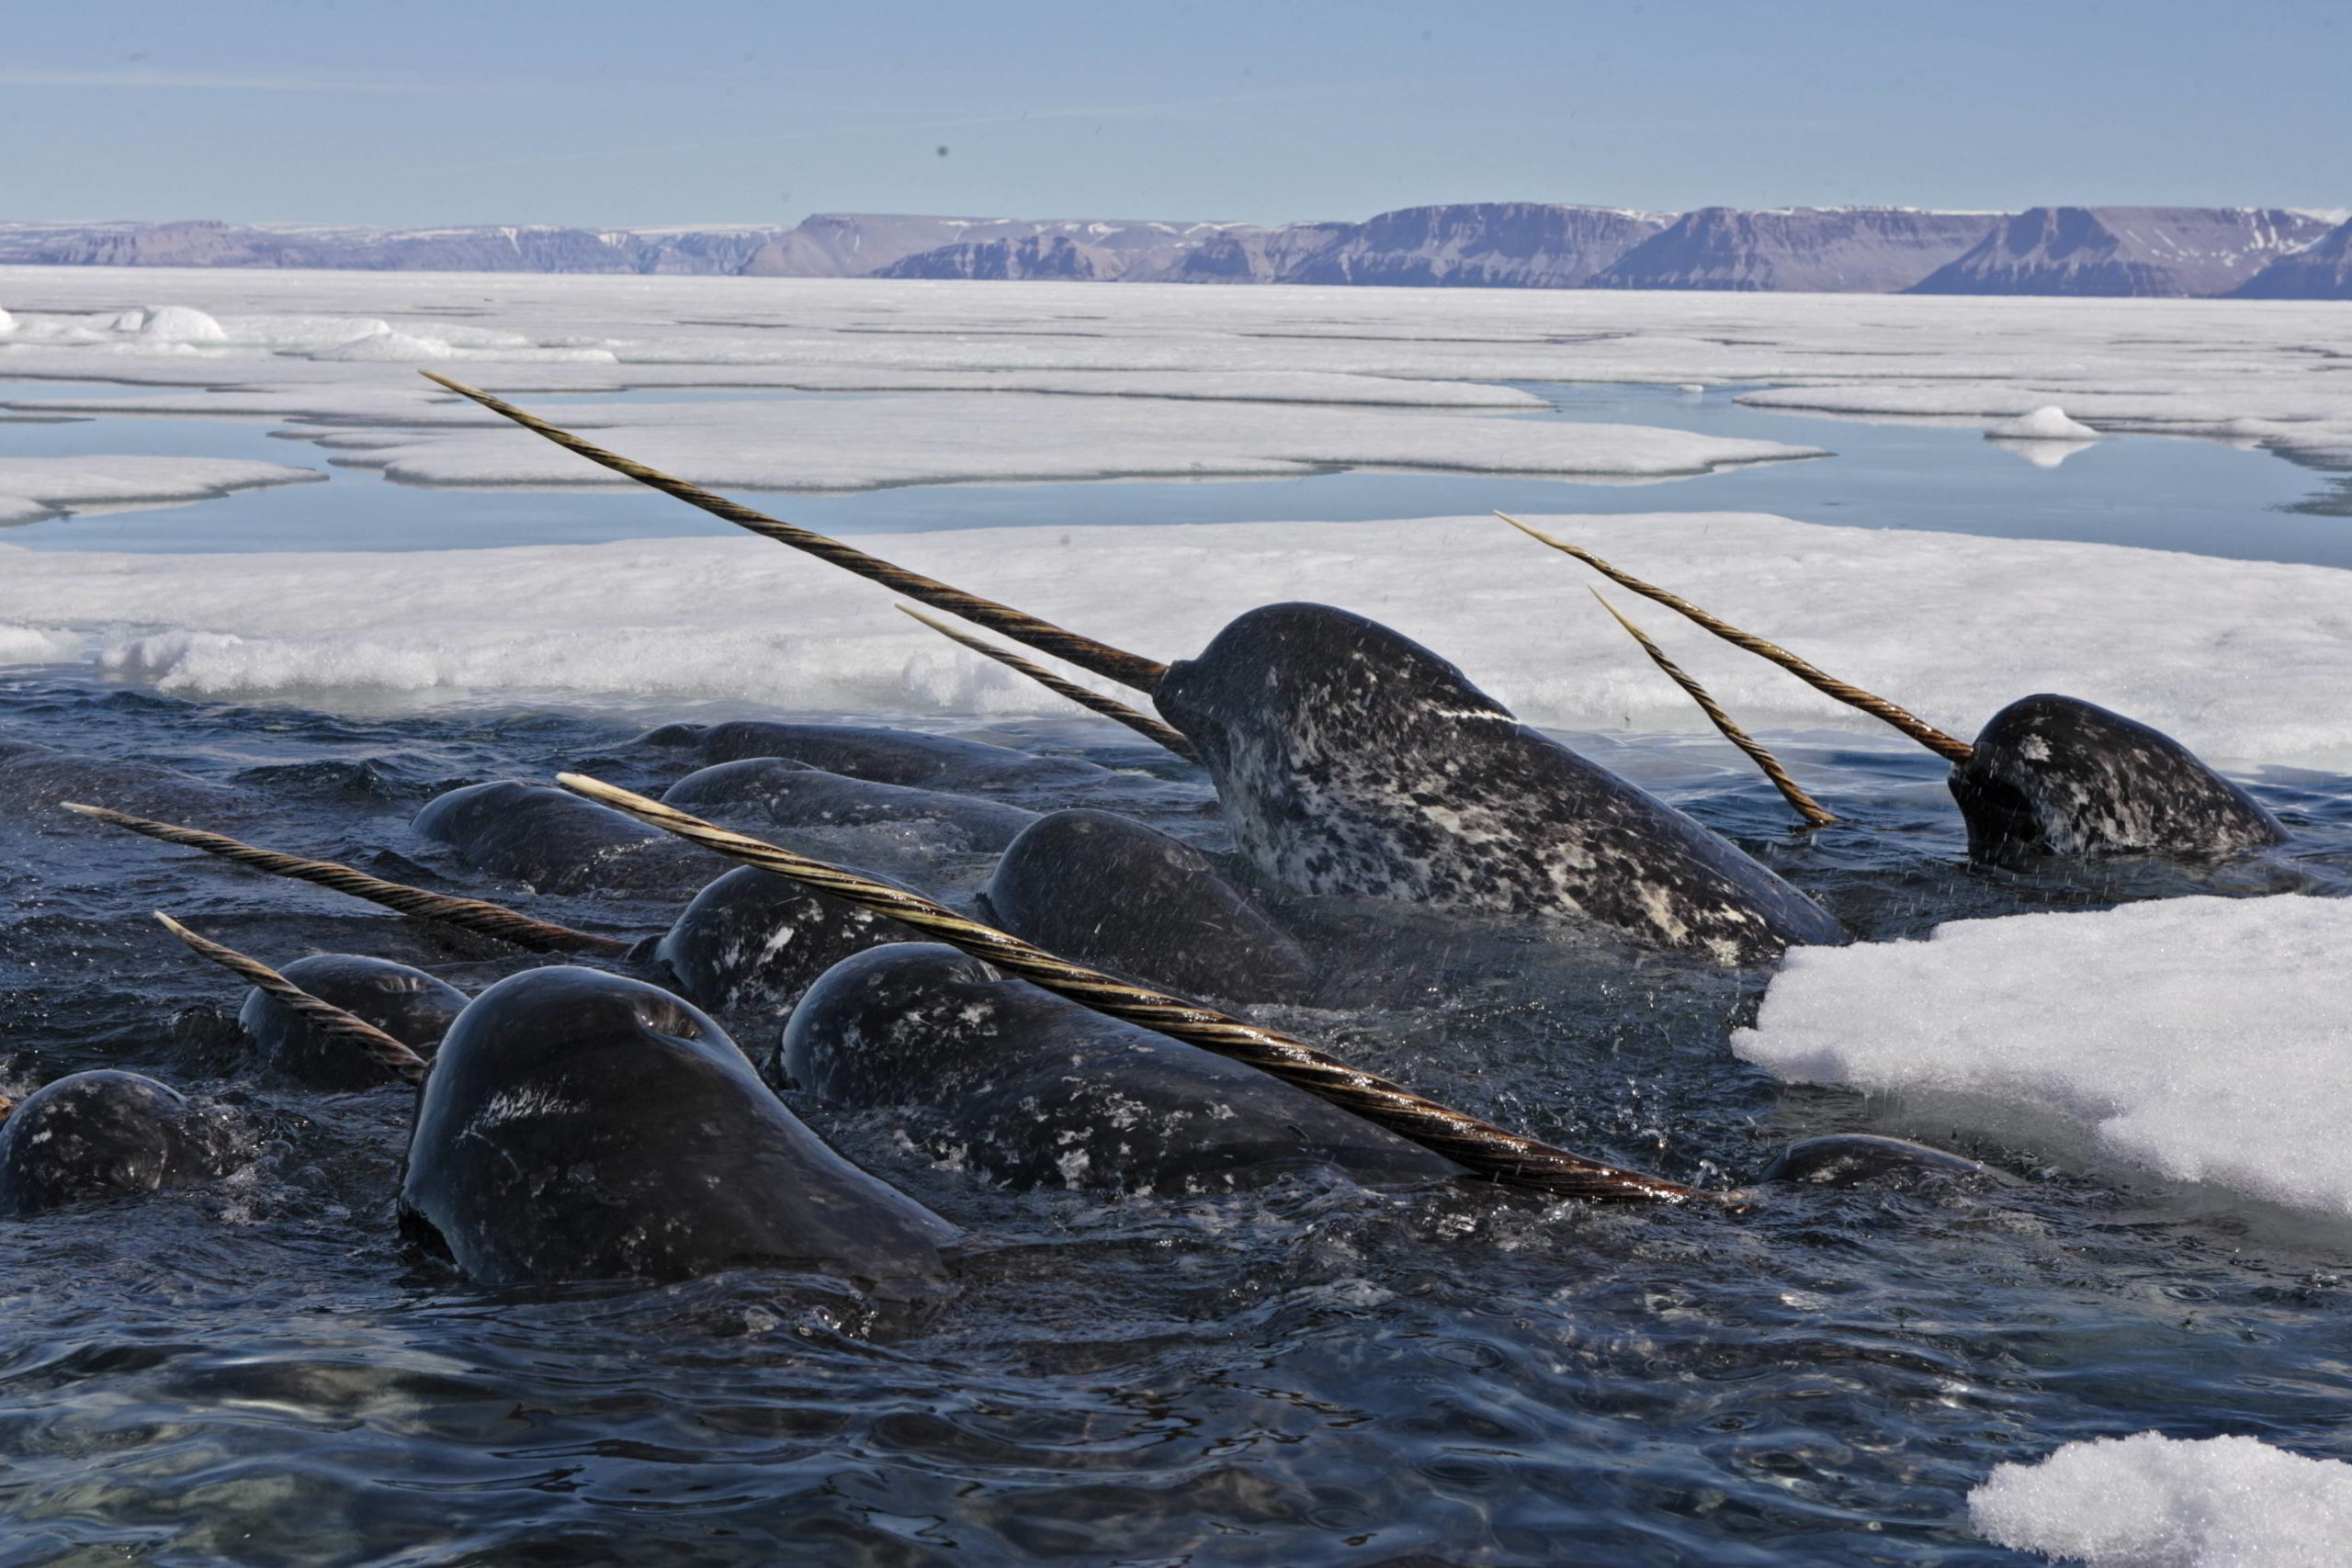 Narwhal A pod of male narwhal (Monodon monoceros) in Nunavut, Canada